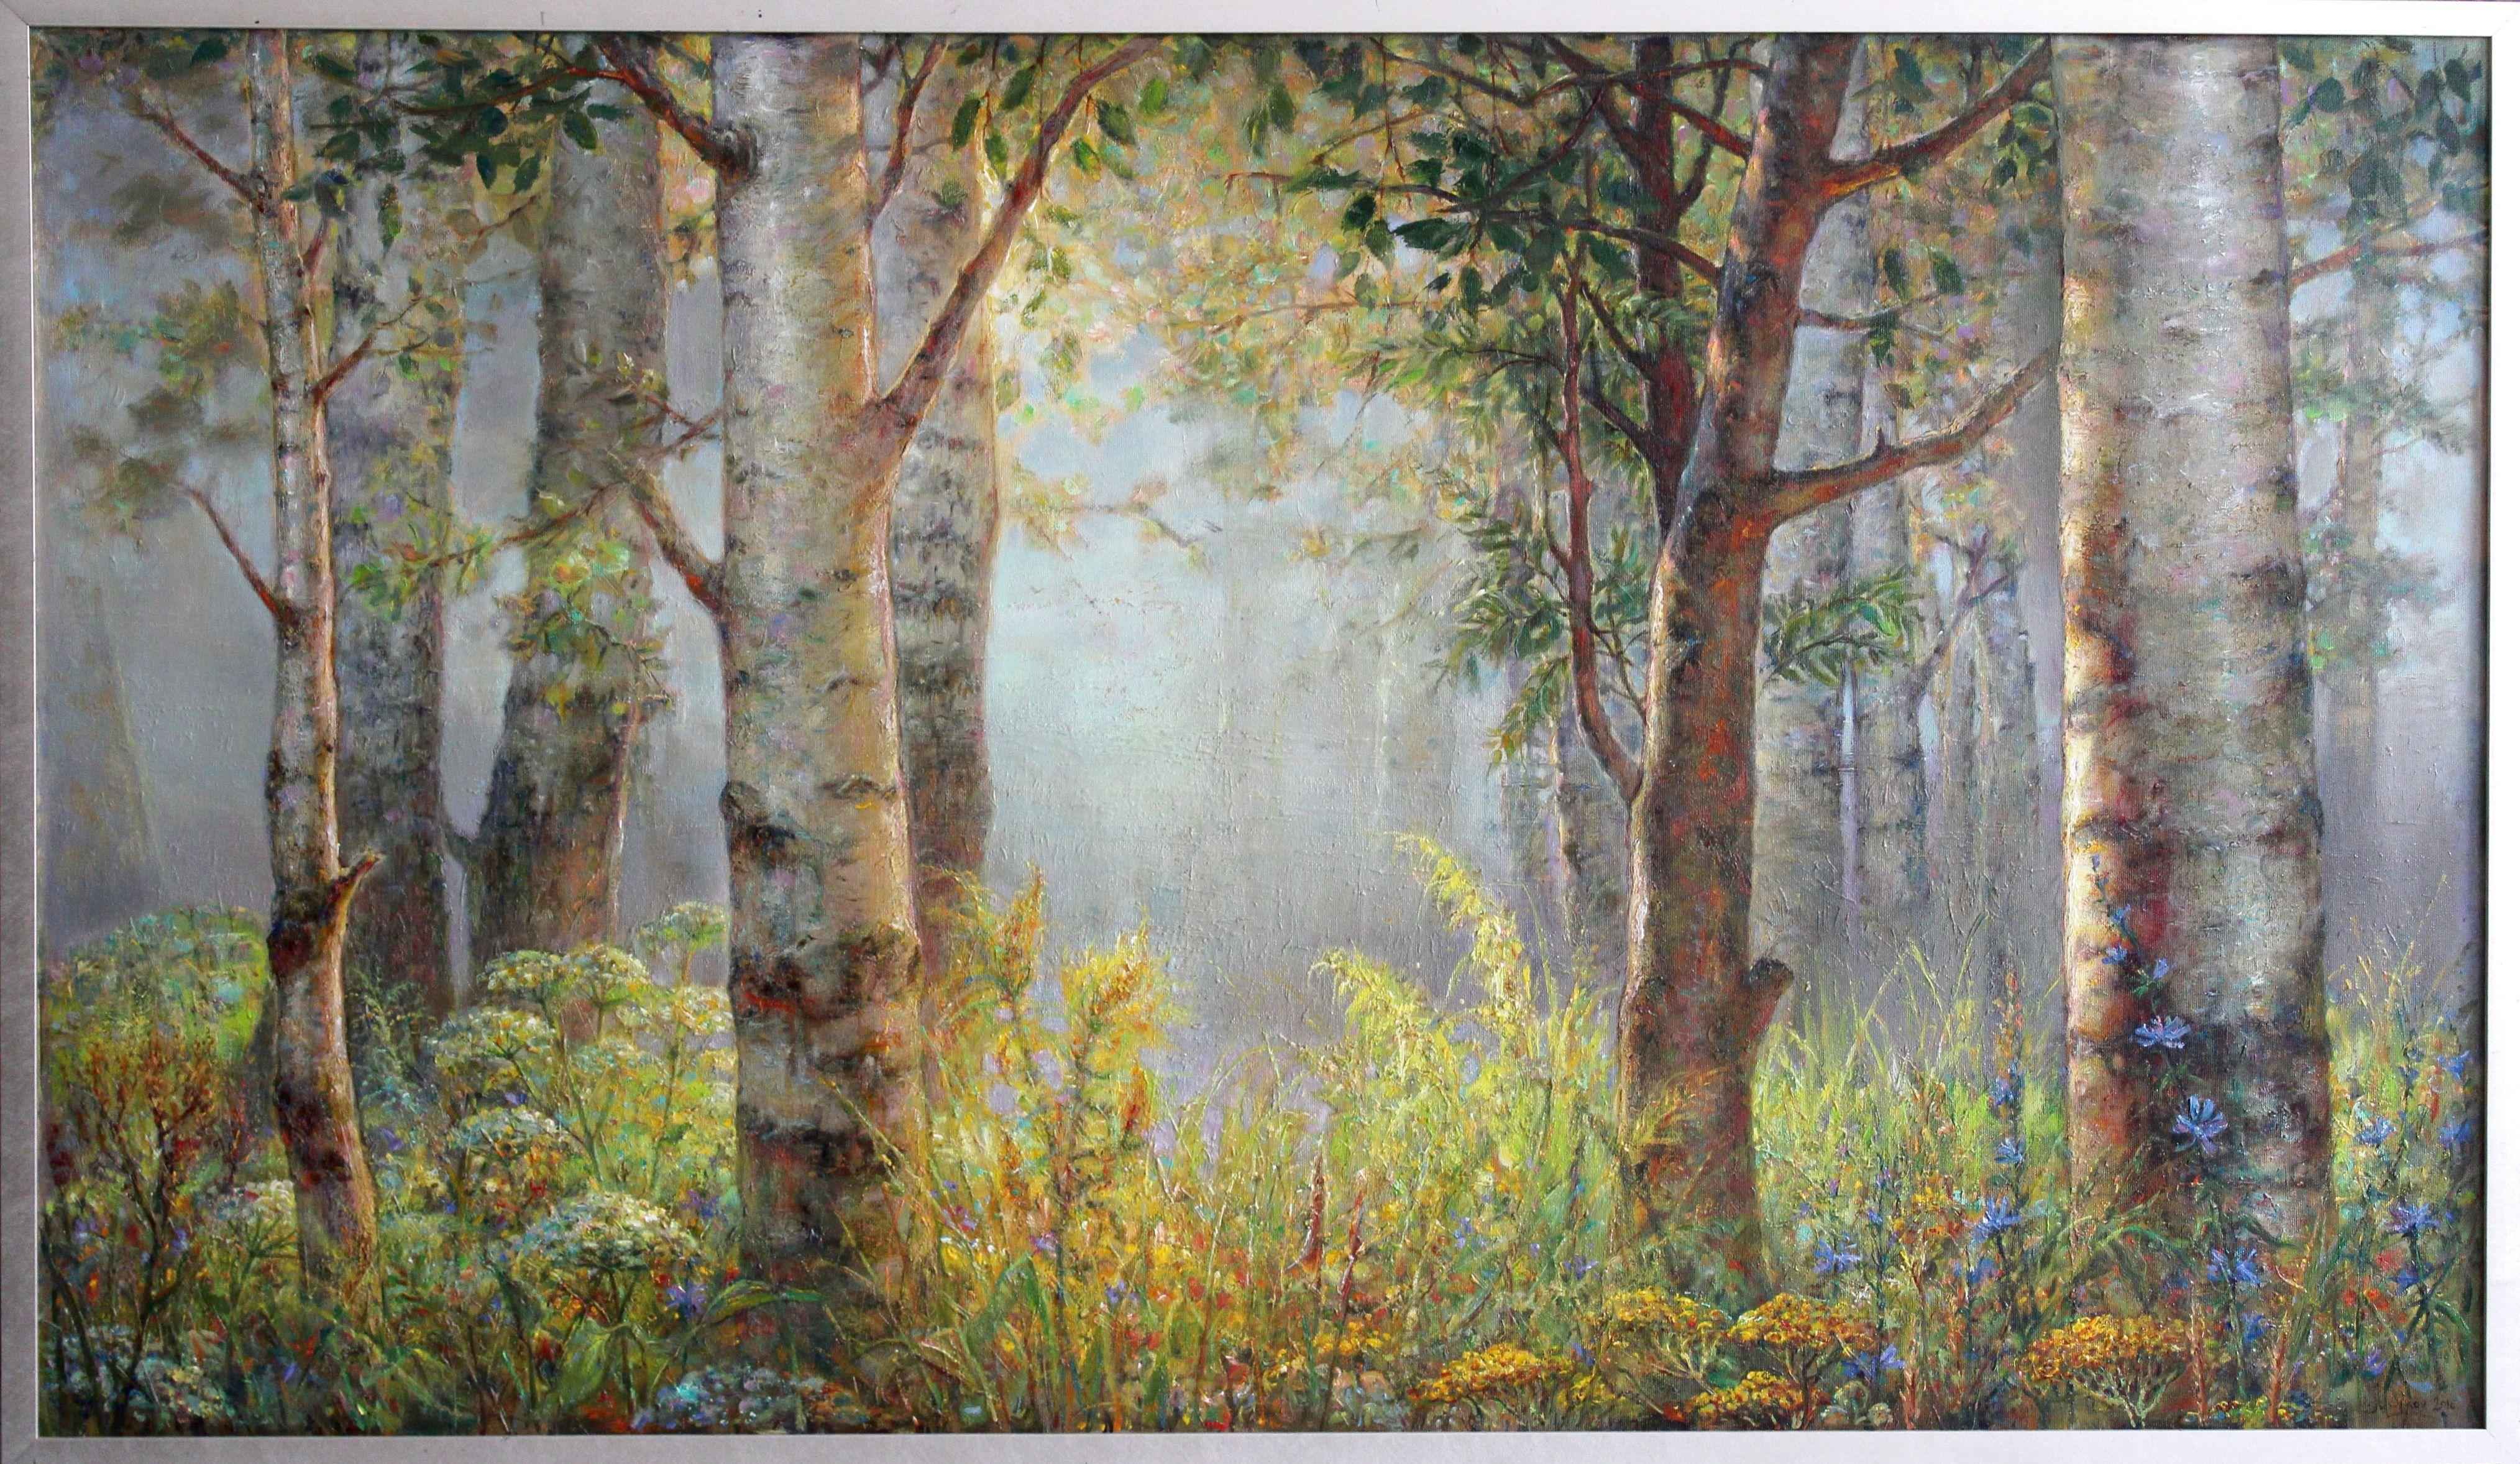 Landscape with birch trees. 2010, canvas, oil, 79x137 cm - Painting by Igor Maikov